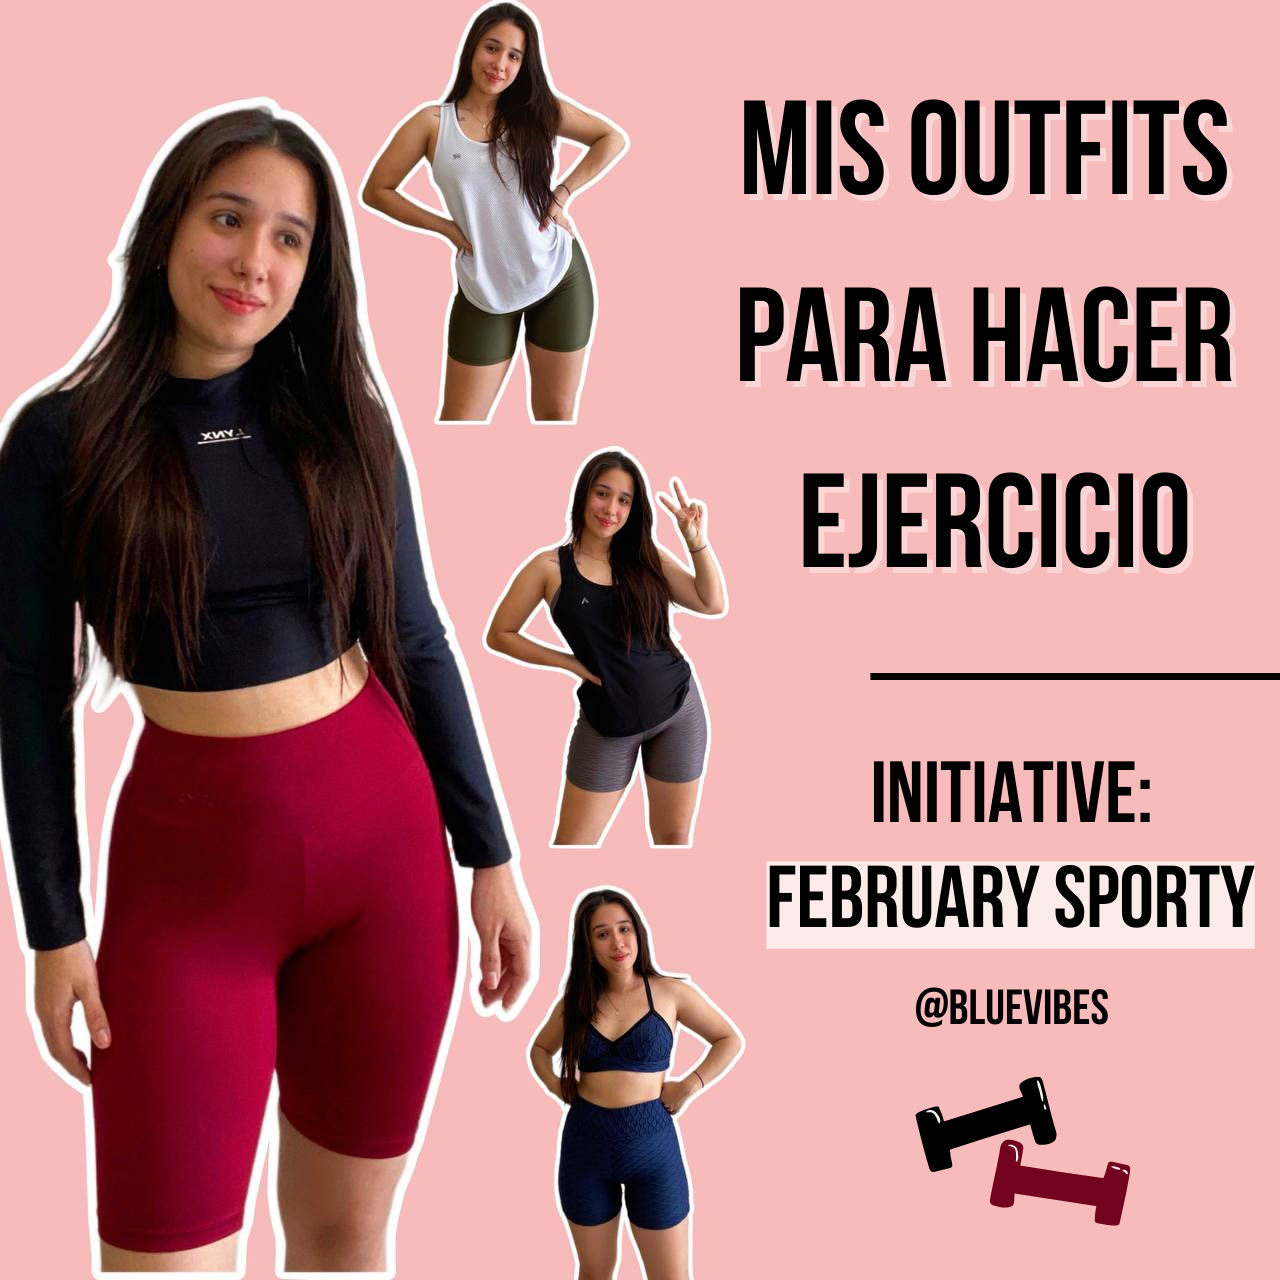 My outfits for exercise 🏃🏻‍♀️🏋🏻‍♀️, Initiative: February sporty  👟⚡️[ESP-ENG]